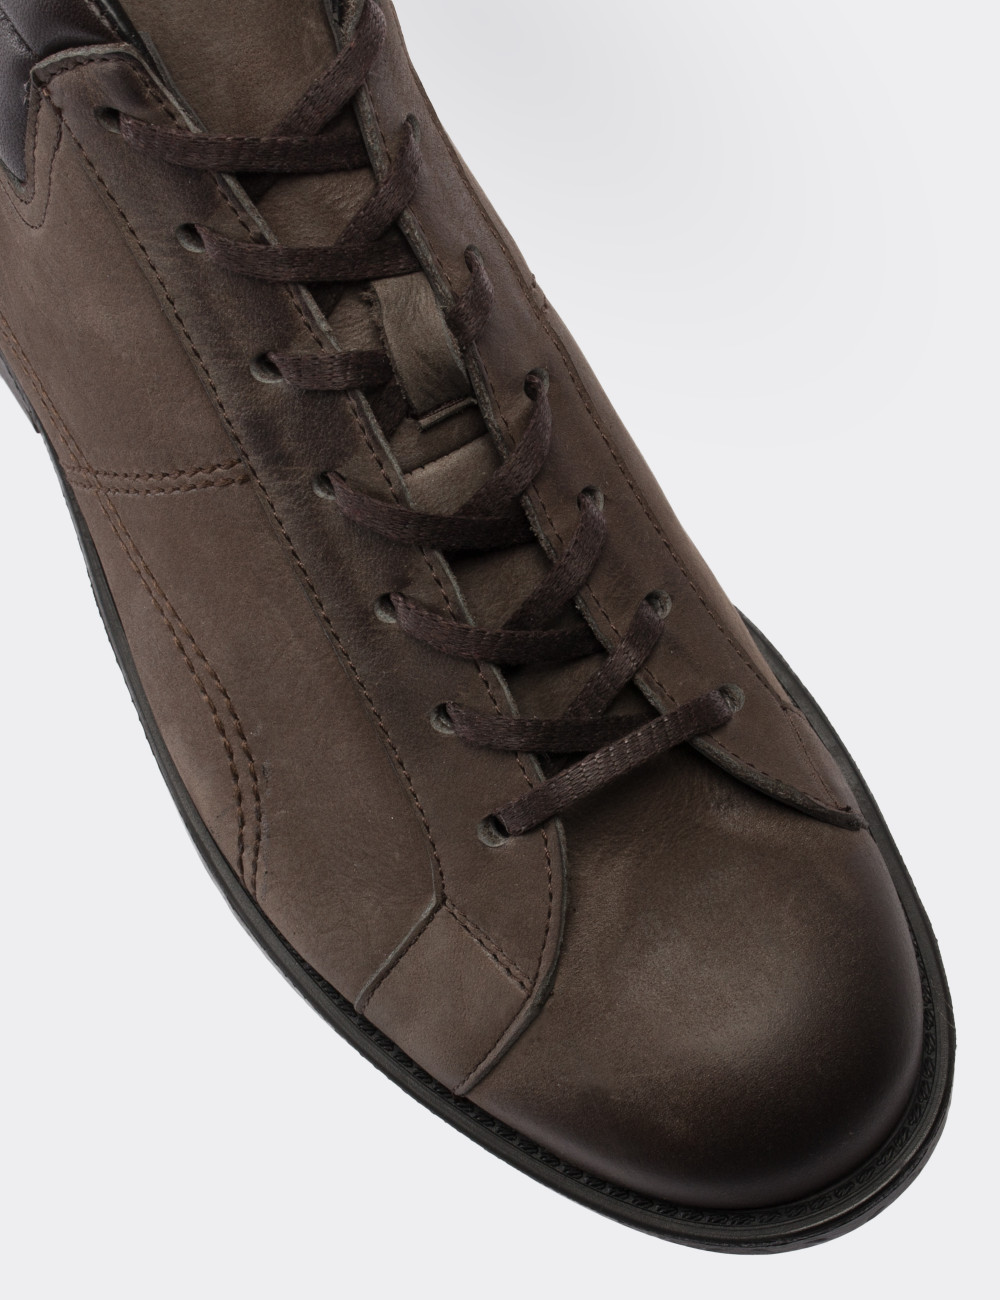 Gray Nubuck Leather Boots - 01760MGRIC02